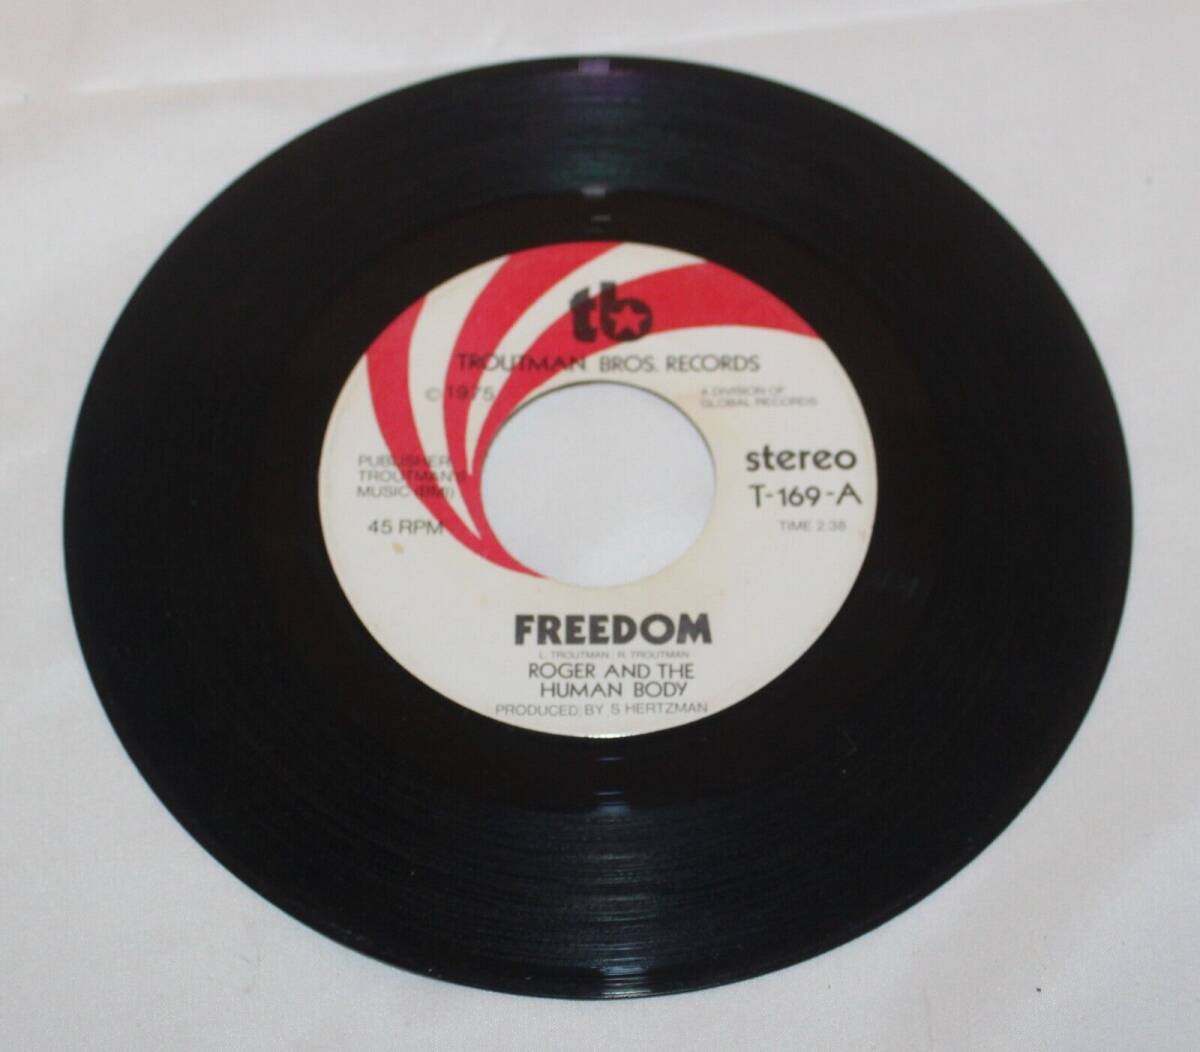 Roger & The Human Body Freedom /Revised Troutman Bros Funk 45 rpm Record T 169 海外 即決の画像2